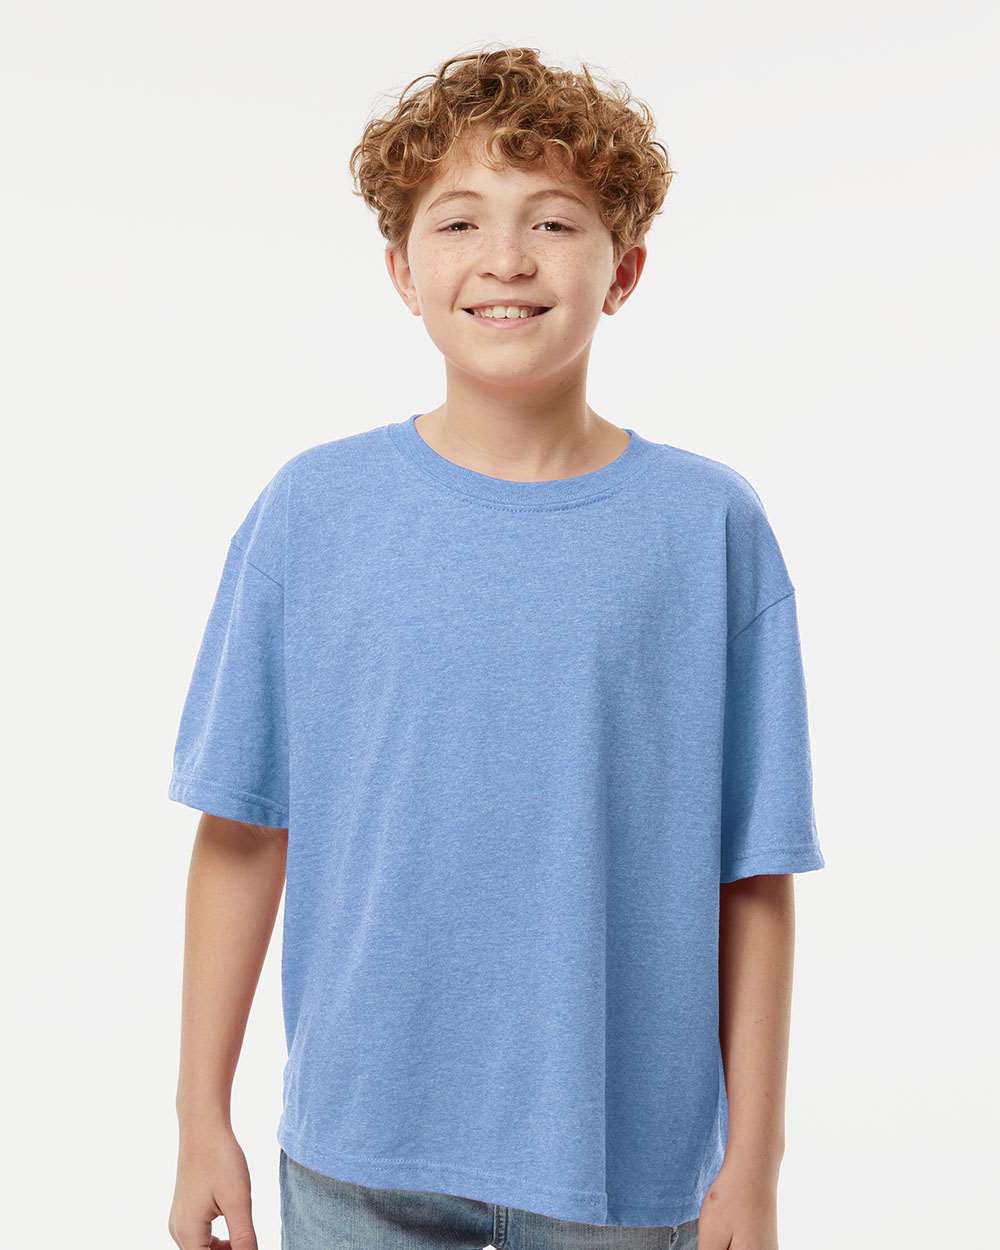 M&O Youth Gold Soft Touch T-Shirt 4850 #colormdl_Light Blue Heather